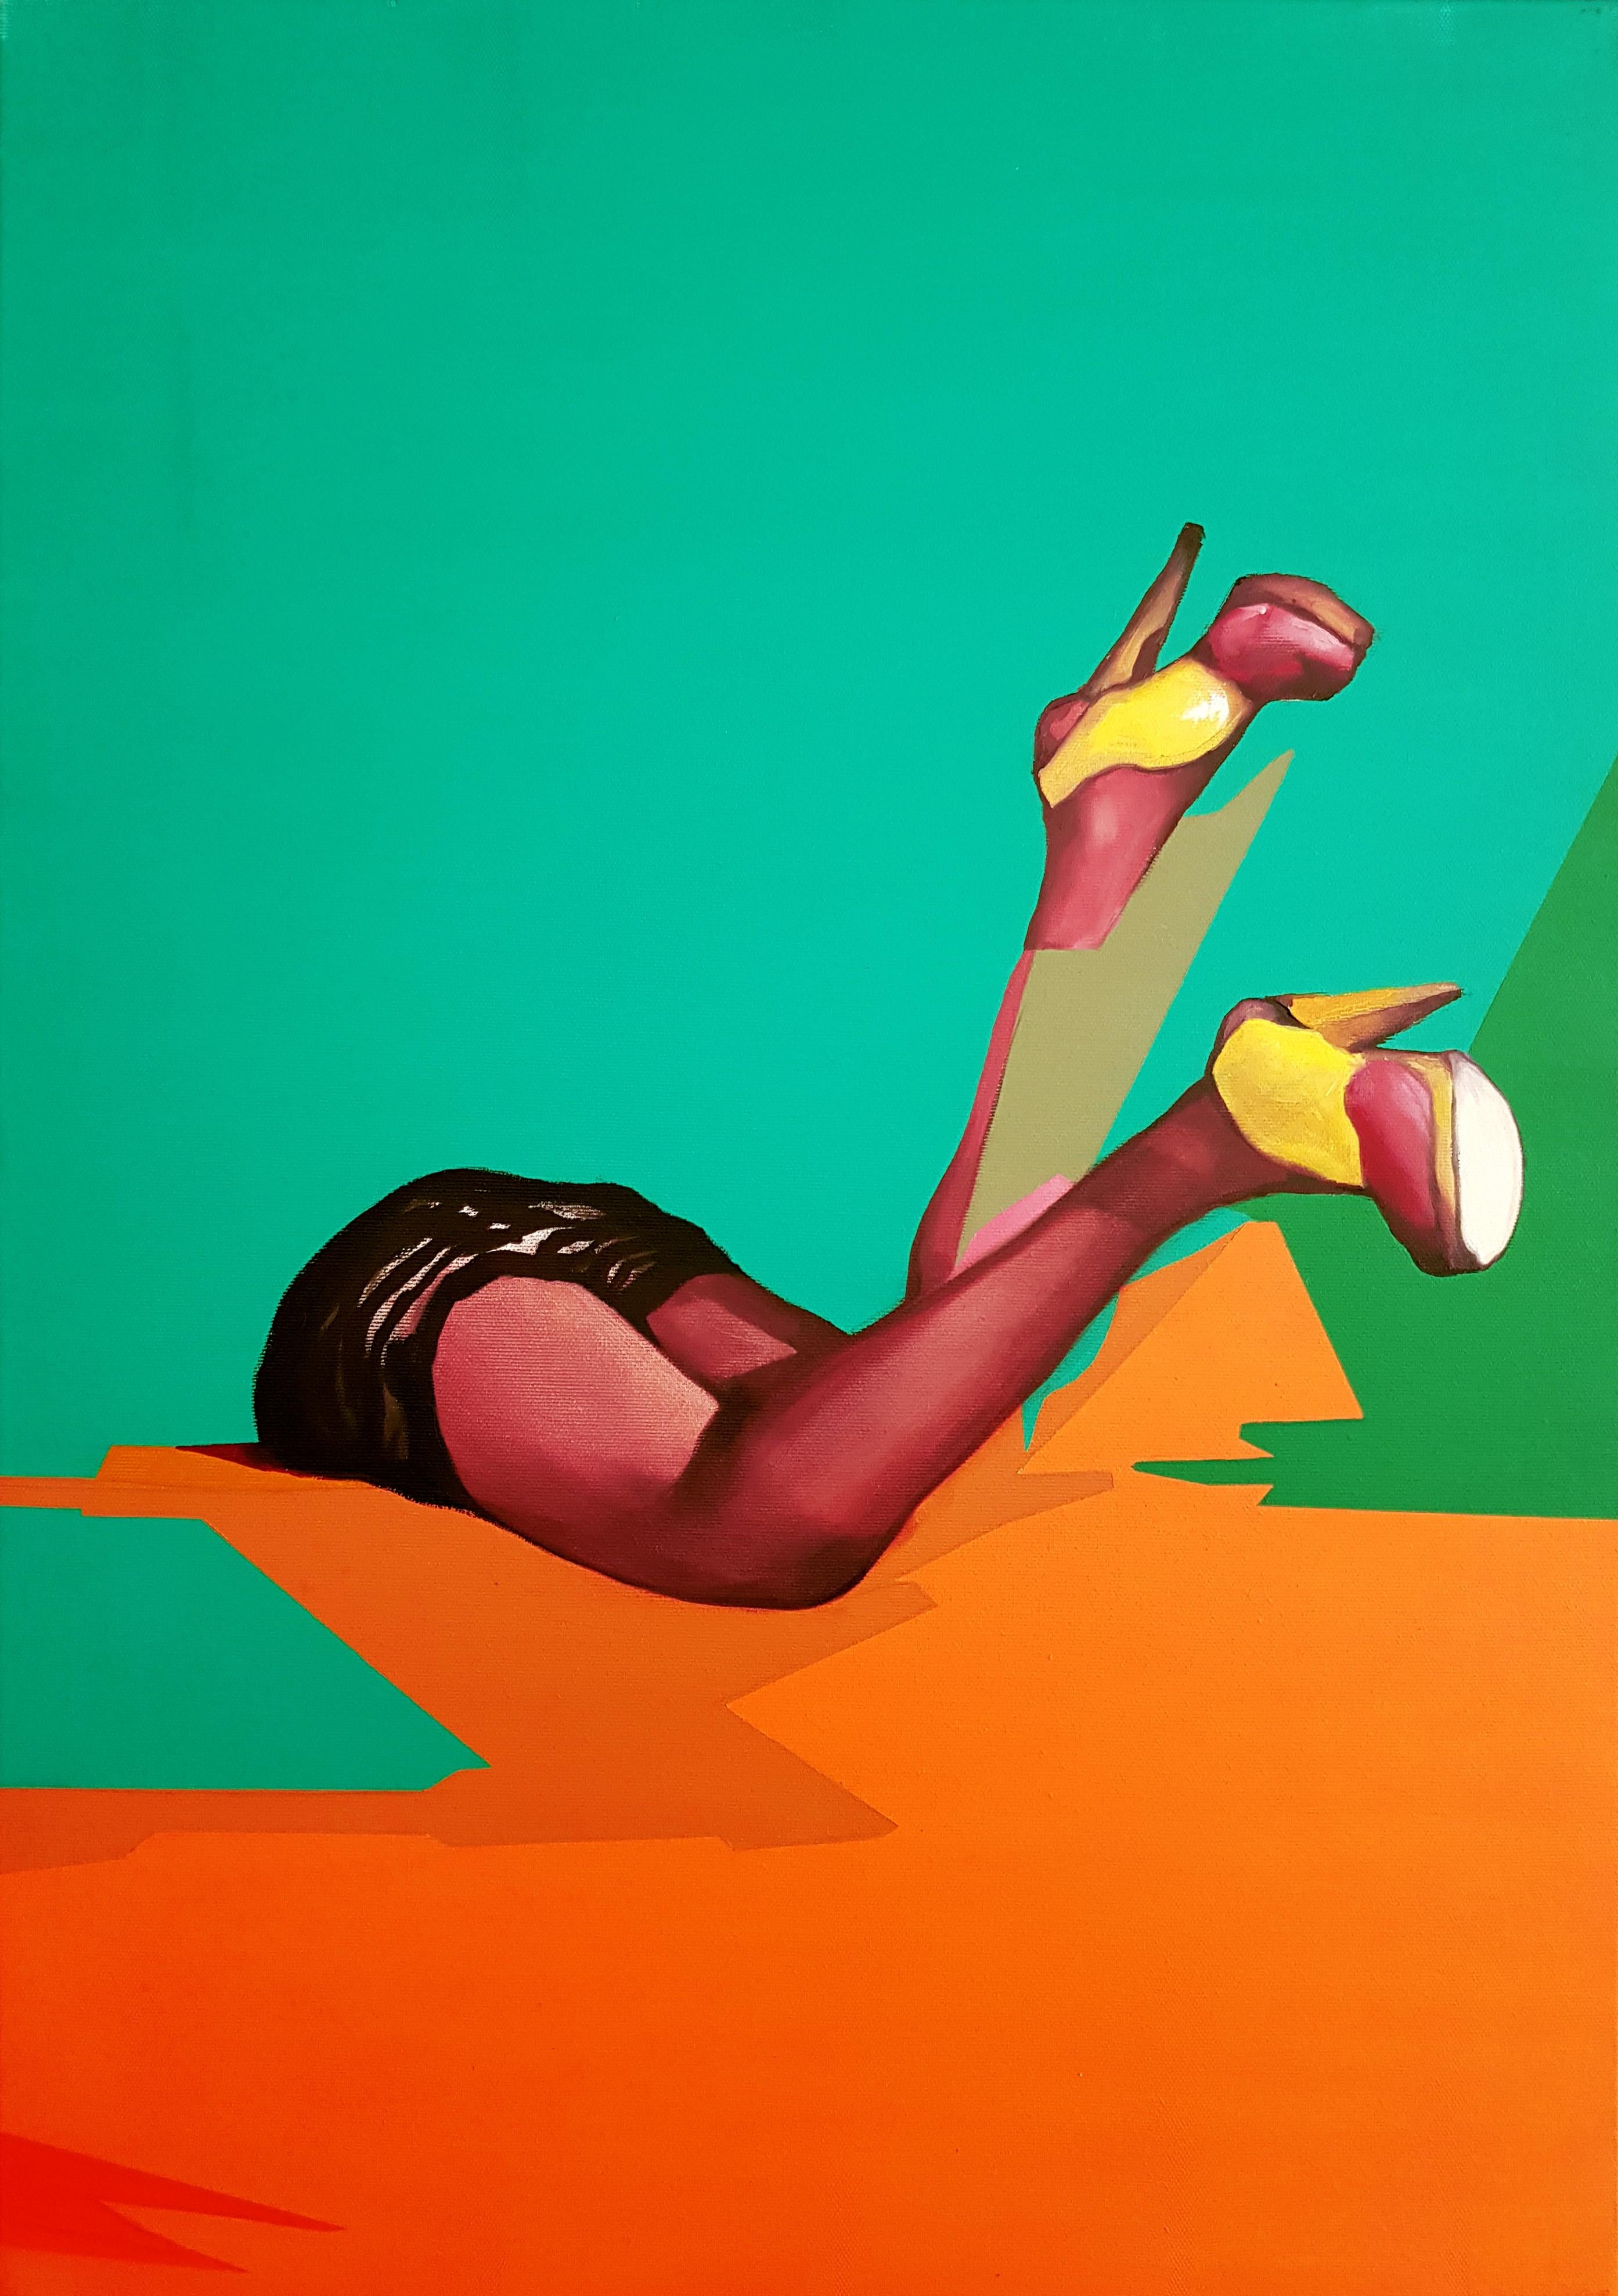 Inquisitive Interlude - Contemporary, Legs, Orange, Green, Beauty, Glamour, Lady